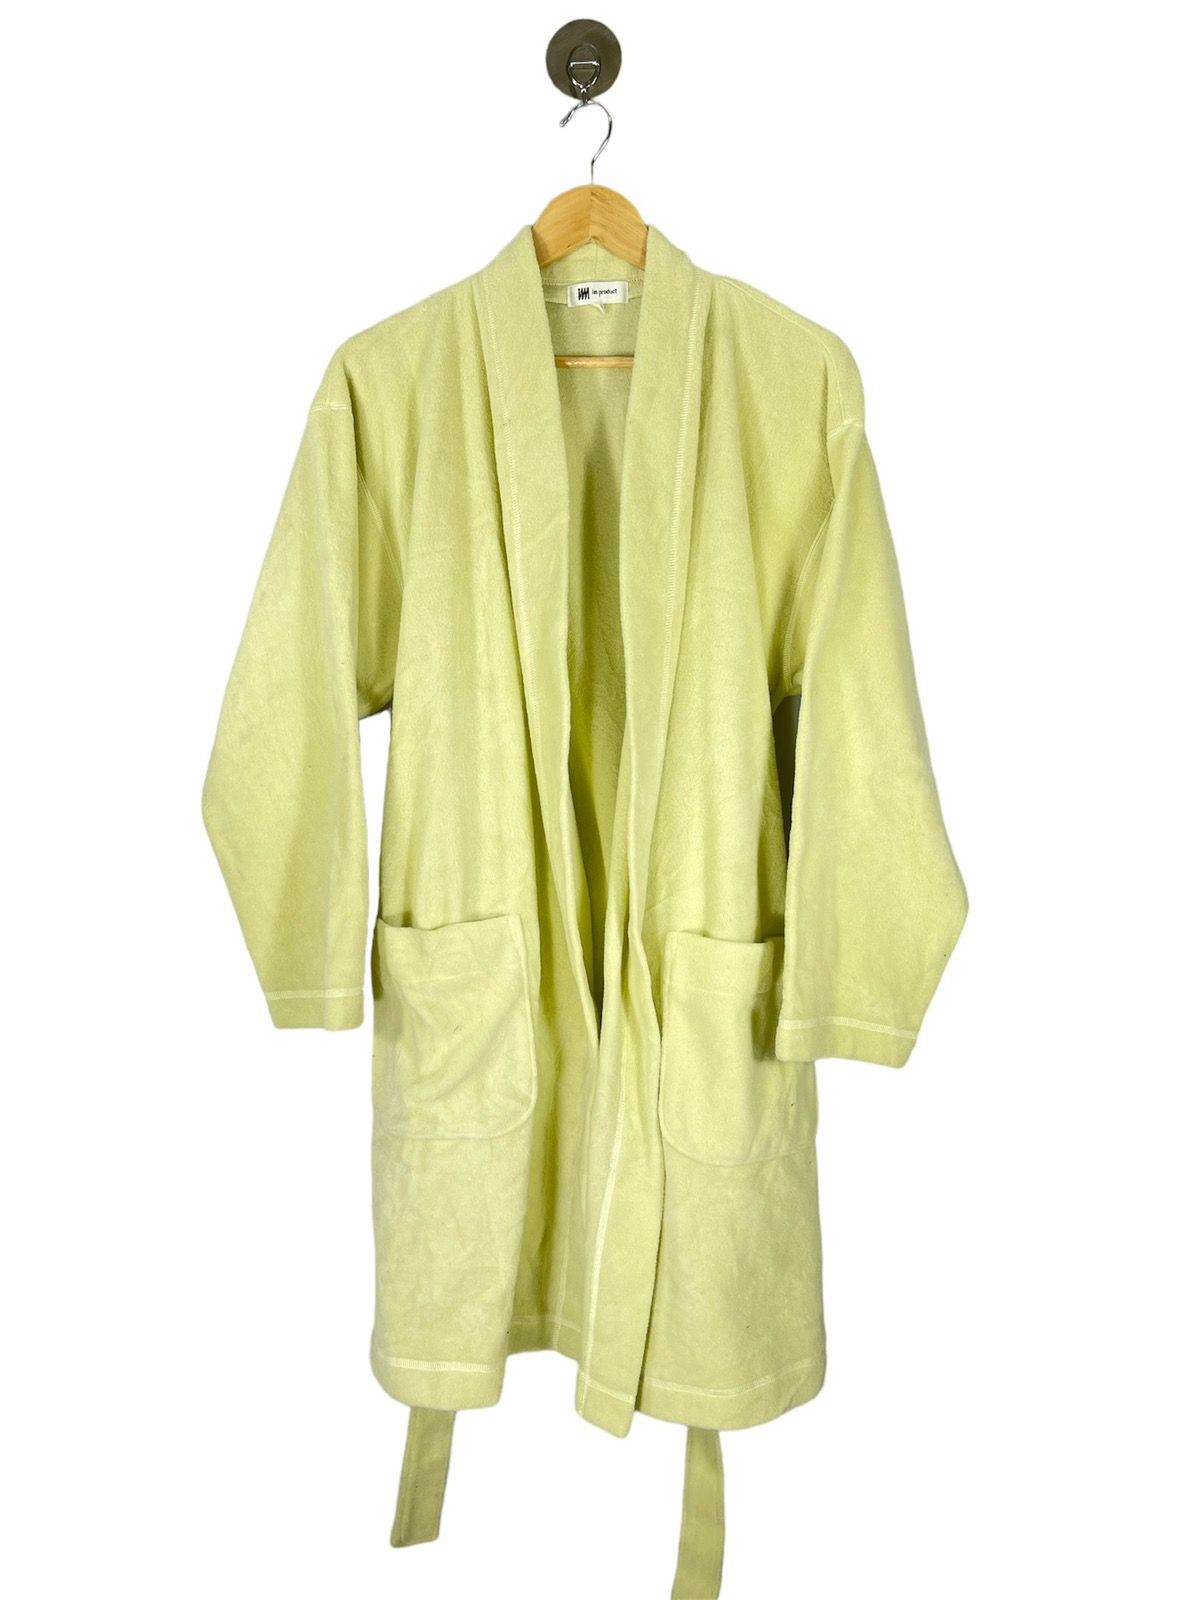 Pre-owned Issey Miyake X Vintage Im Product By Issey Miyake Capes Jacket Item In Light Yellow